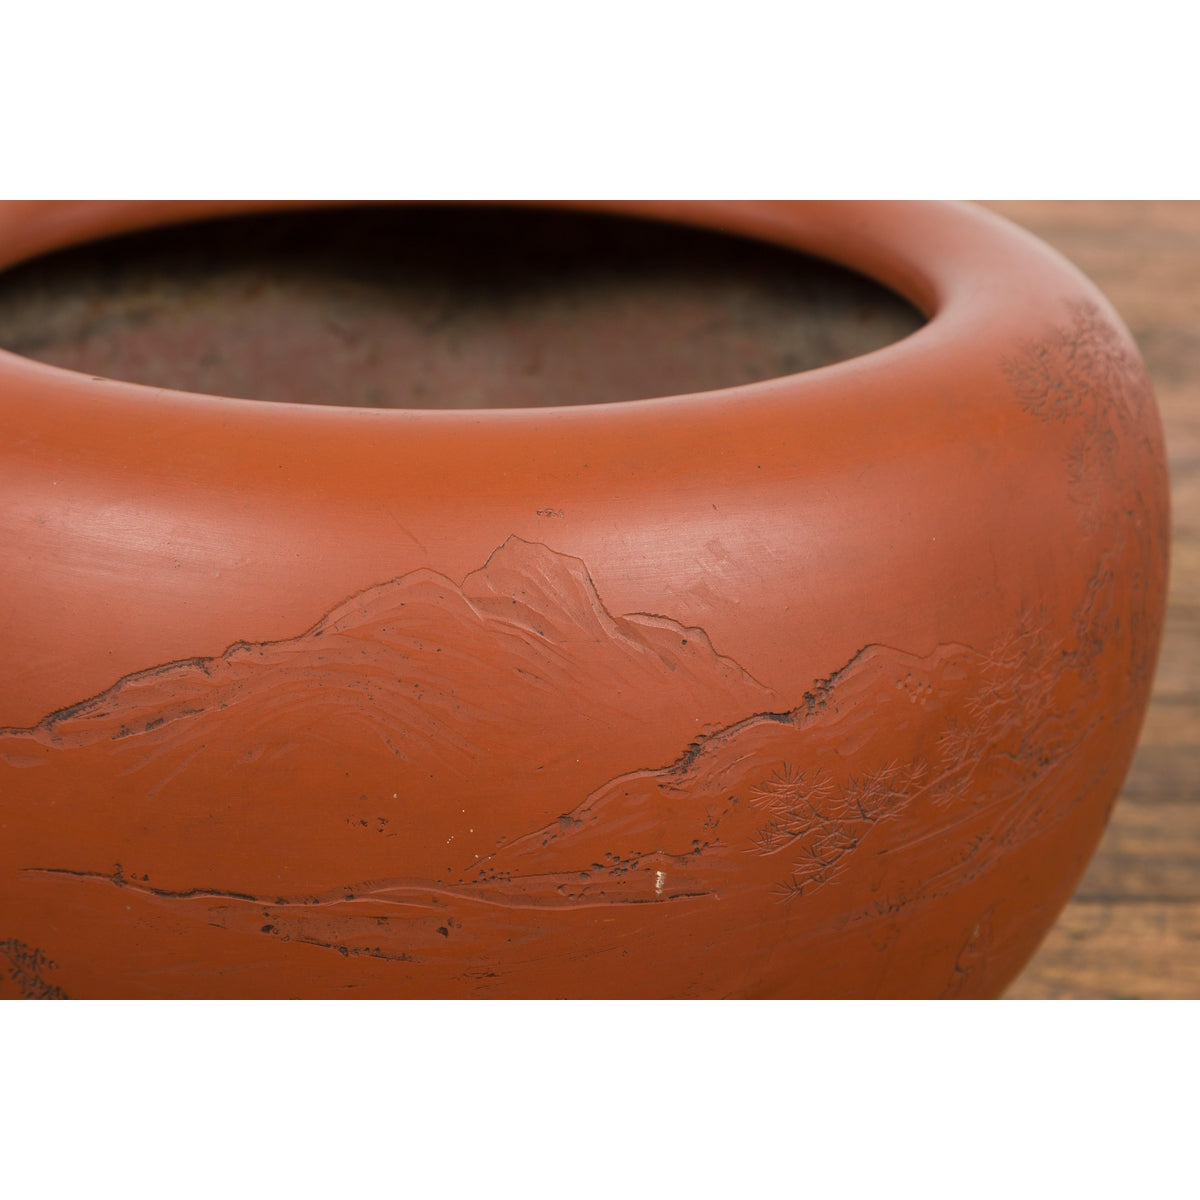 Orange Circular Antique Planter with Etched Design-YN7819-12. Asian & Chinese Furniture, Art, Antiques, Vintage Home Décor for sale at FEA Home